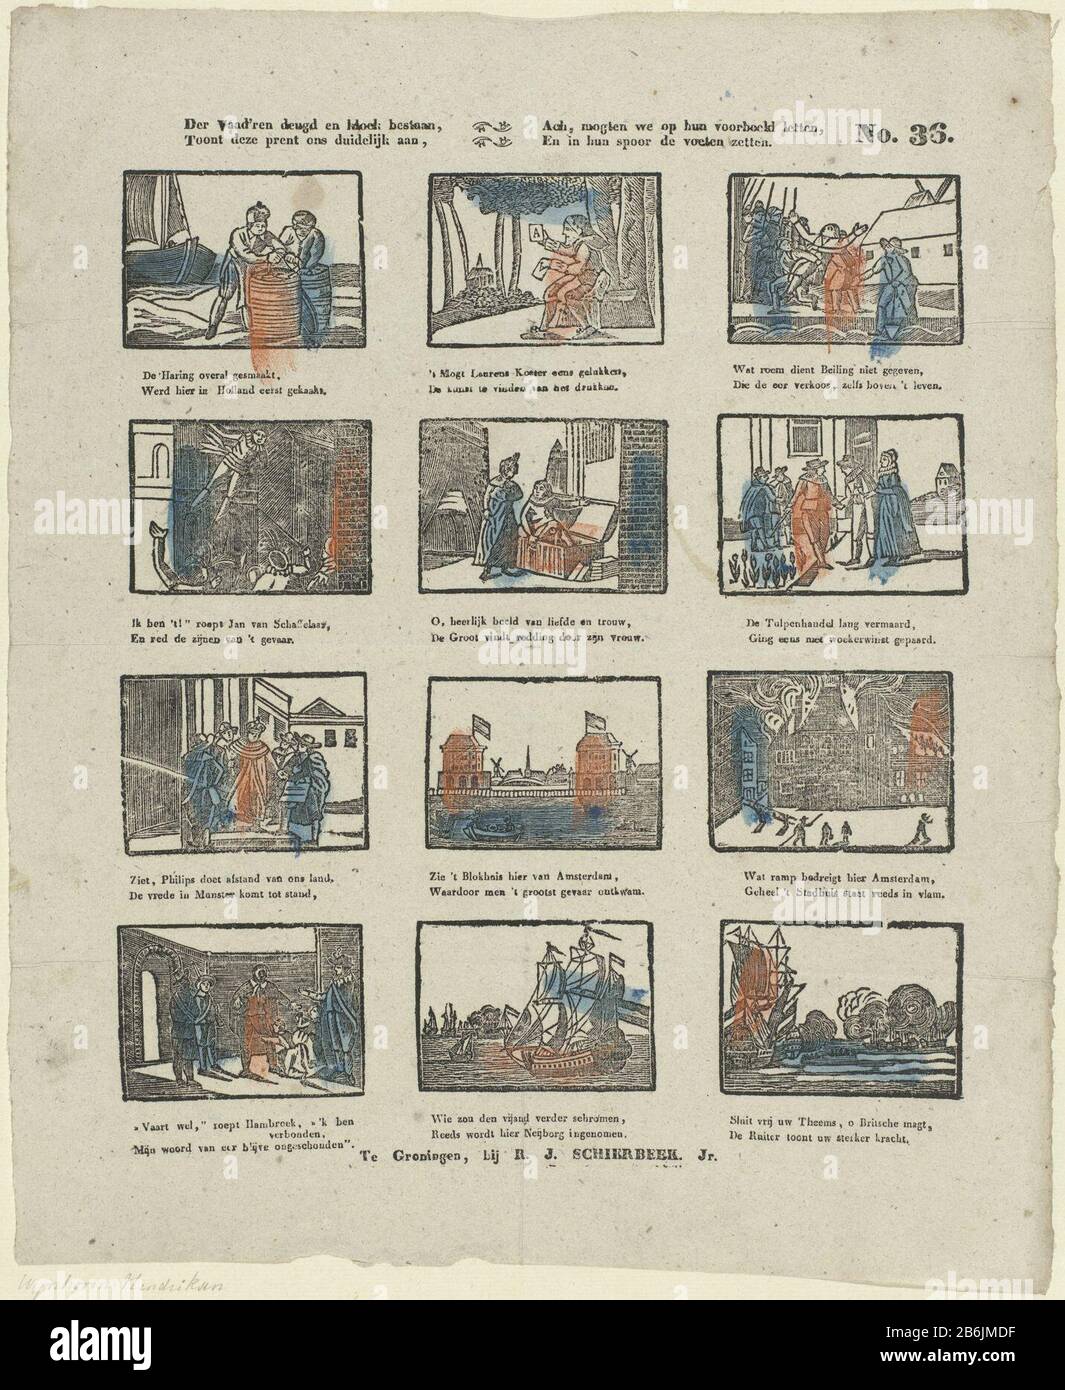 Vaad'ren of virtue and prudent life, show us this picture clearly, Ah mogten we look at their example, and their track set feet (title object) Leaf with 12 representations of characters and events from Dutch history, Where: under Laurens Janszoon Coster (one of the inventors of printing ), Hugo Grotius which ontslapt from Loevestein and Philip IV of Spain and the Peace of Westphalia. Under each image a two-line verse. Numbered upper right: No. 36. Manufacturer : Seller: Rudolph Jacob Schierbeek (listed building) Editor: Johannes Theodorus Wijnhoven-Hendriksen Print Author: anonymous place Manu Stock Photo